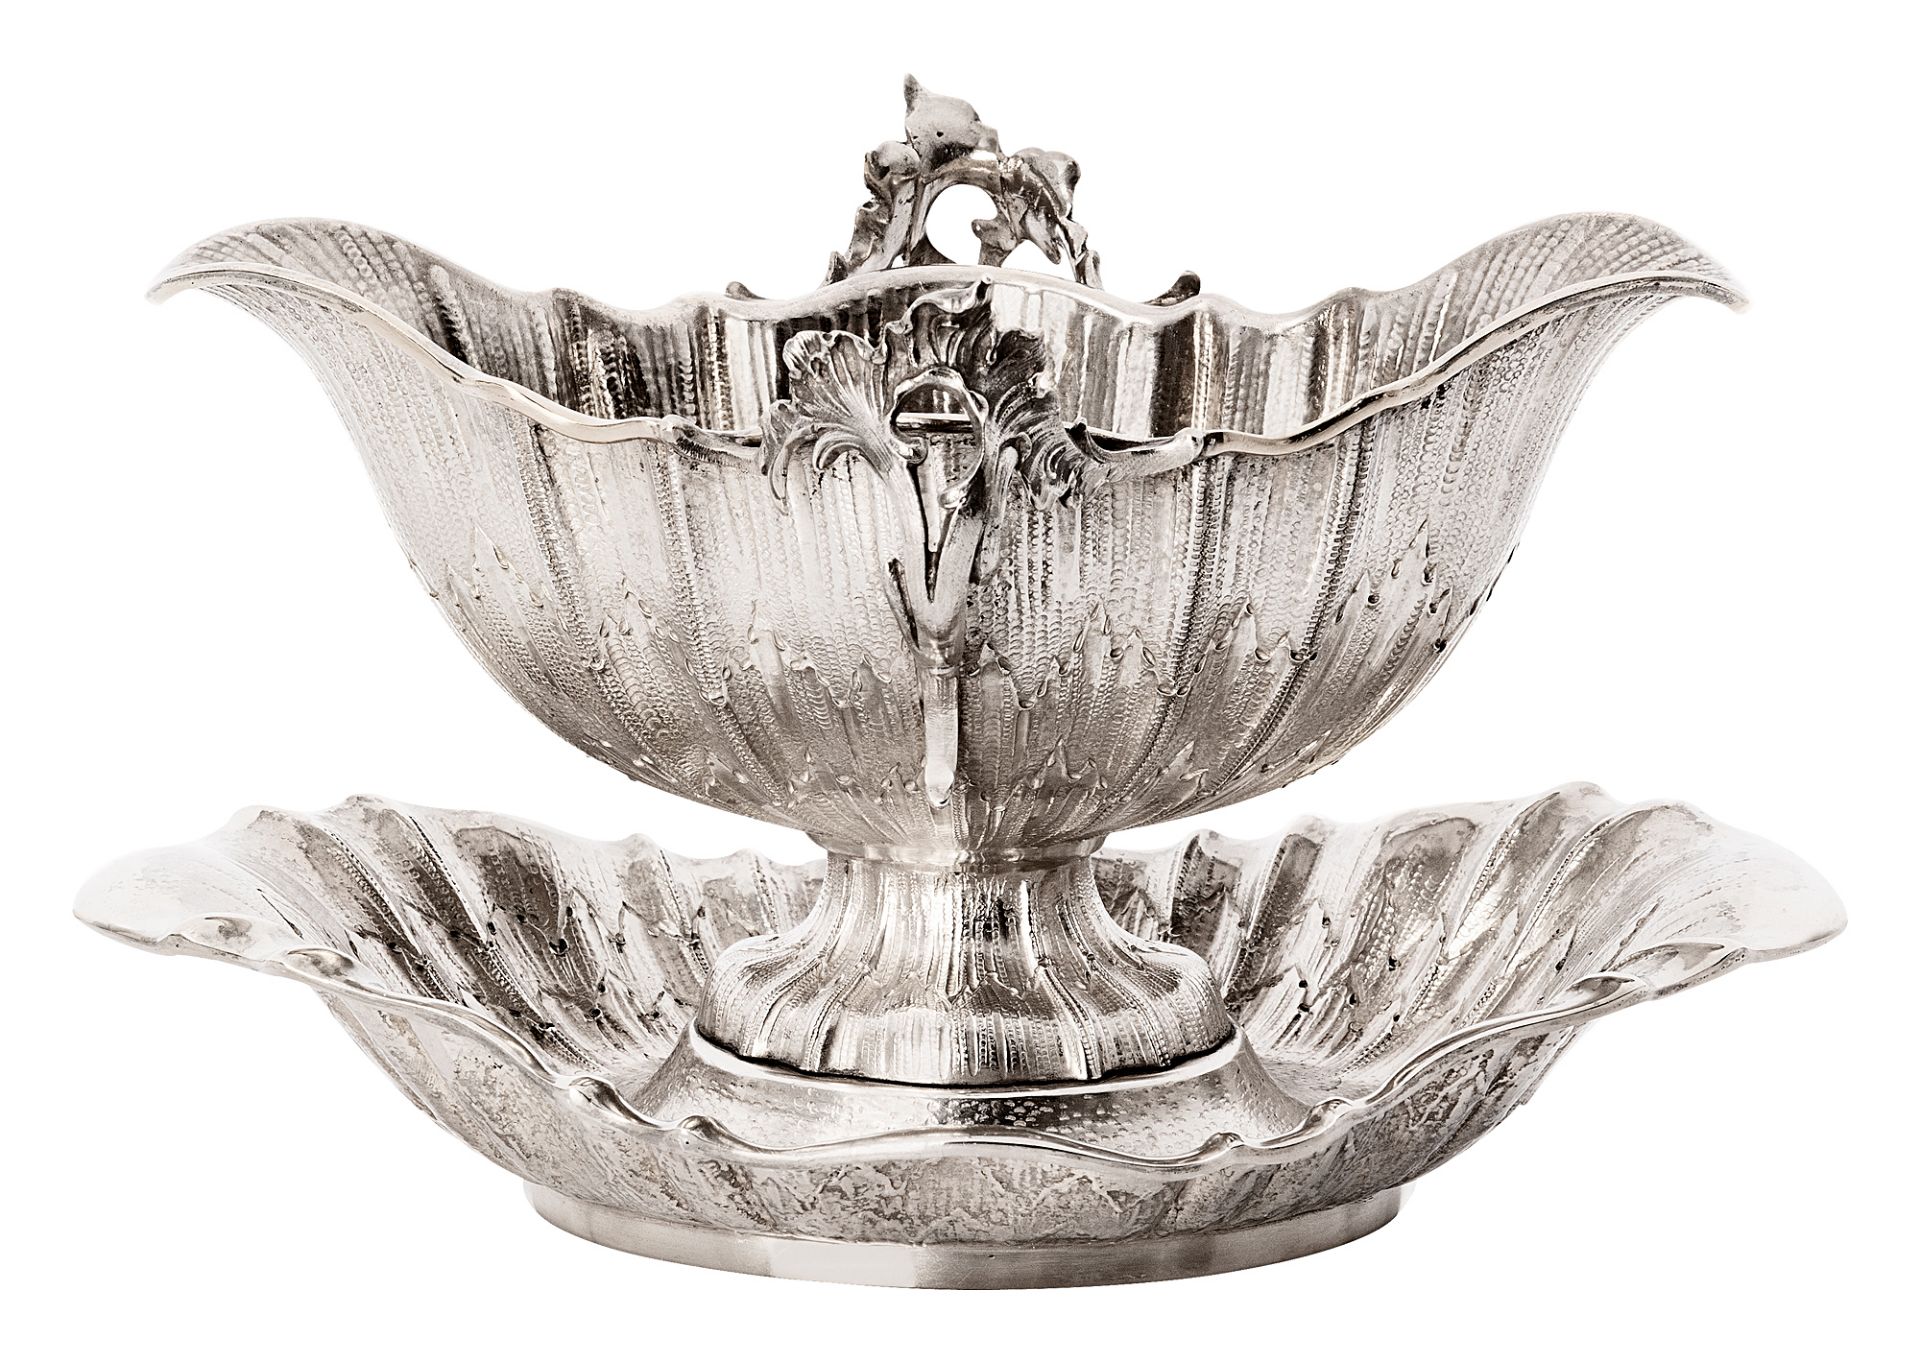 Sauce boat in Rococo style